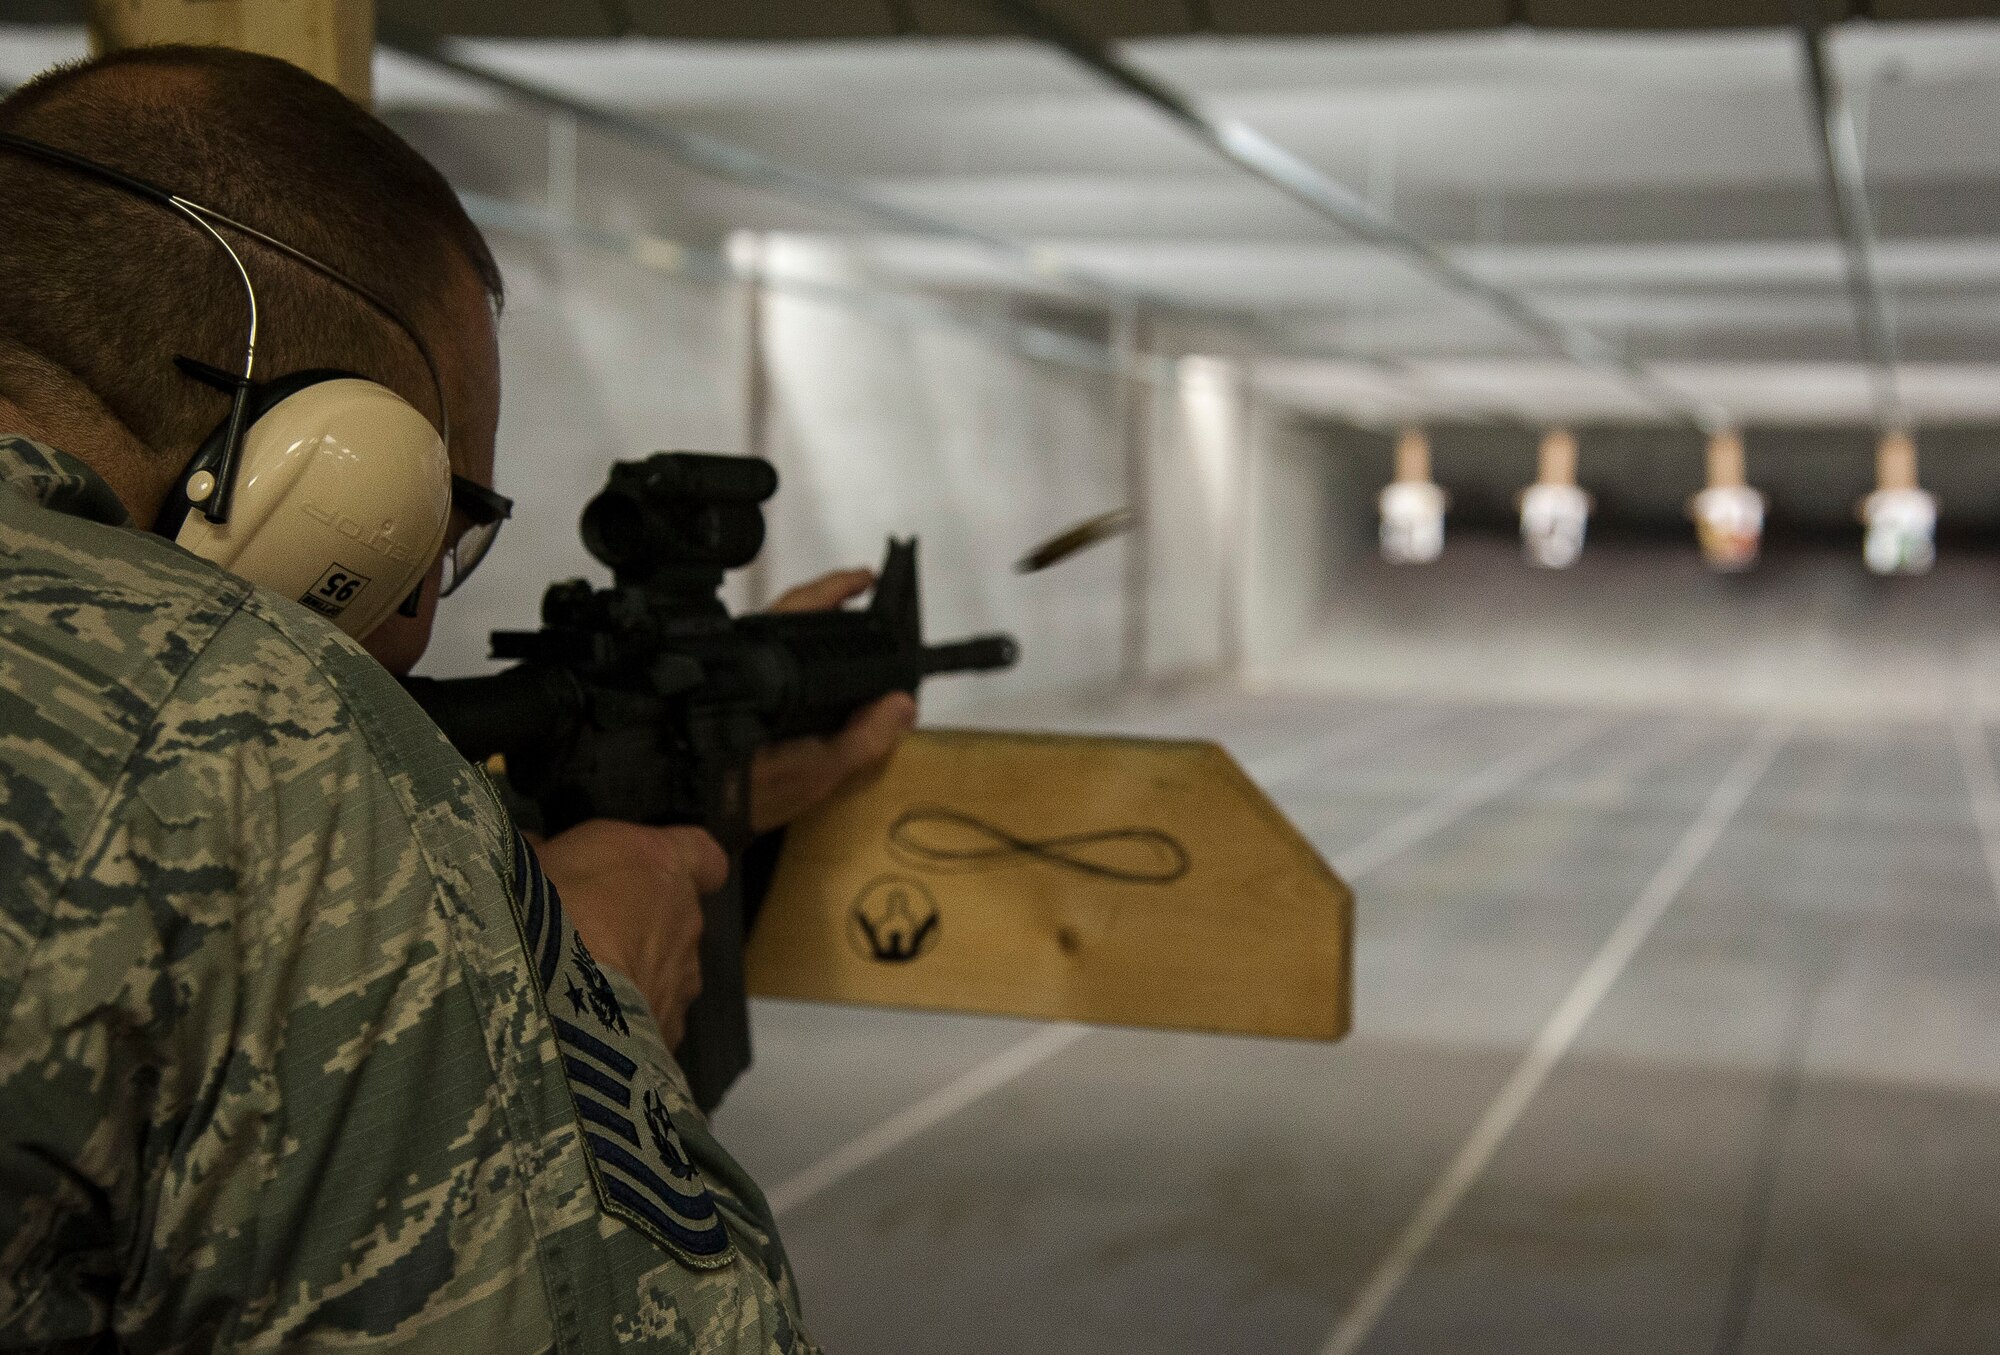 GOODFELLOW AIR FORCE BASE, Texas-- Chief Master Sgt. of the Air Force James A. Roy fires a M4 Carbine at the 17th Security Forces Squadron indoor range Aug. 1. Roy visited Goodfellow to experience the mission of the base and to meet with enlisted Airmen to discuss various topics and address their concerns. (U.S. Air Force Photo/Airman 1st Class Michael Smith)